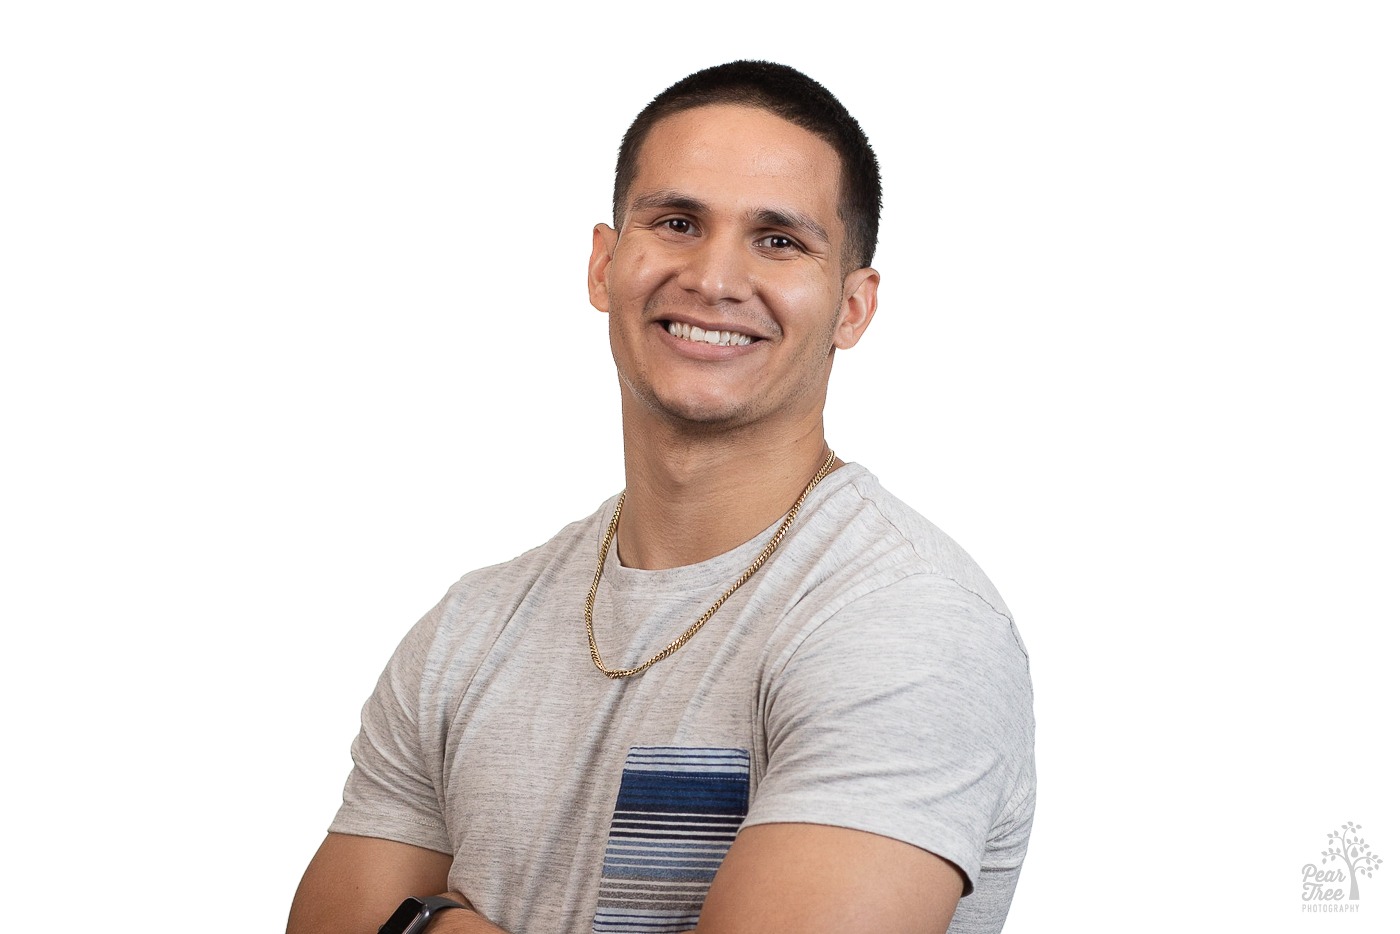 Latin American man wearing a grey tshirt, black Apple watch, and gold chain smiling for a professional headshot in Atlanta front of a white backdrop